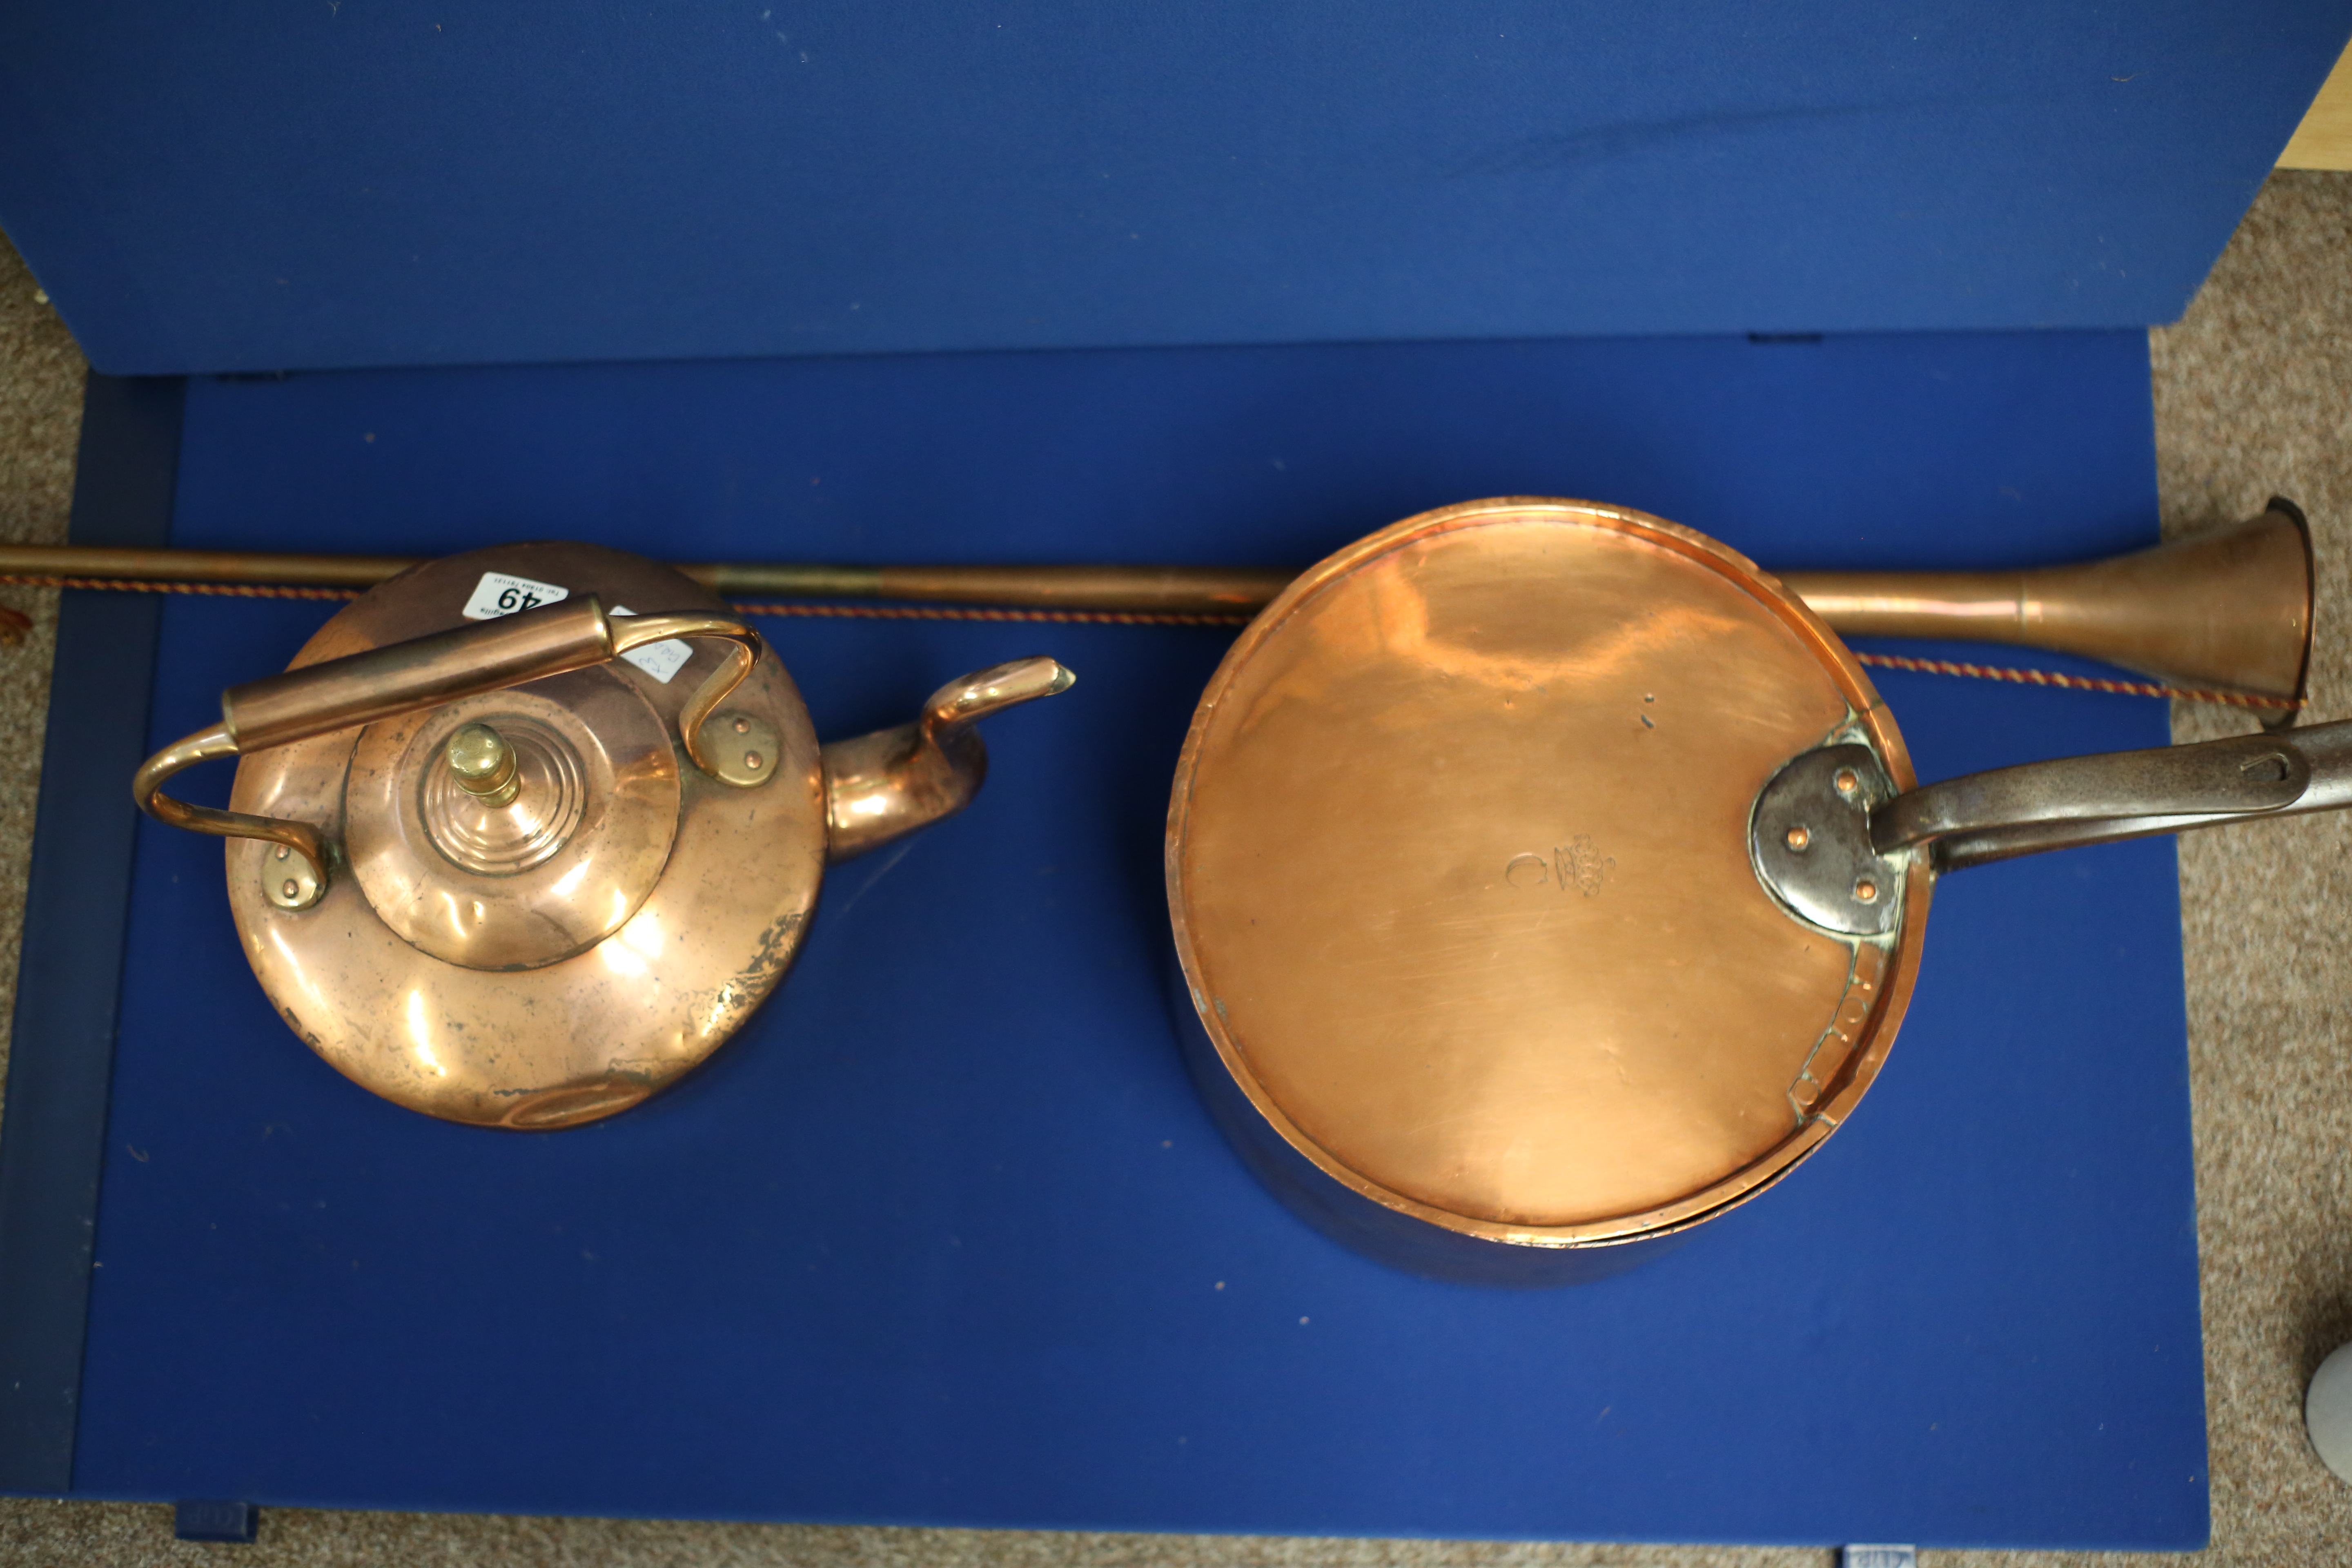 Brass pan, kettle and horn